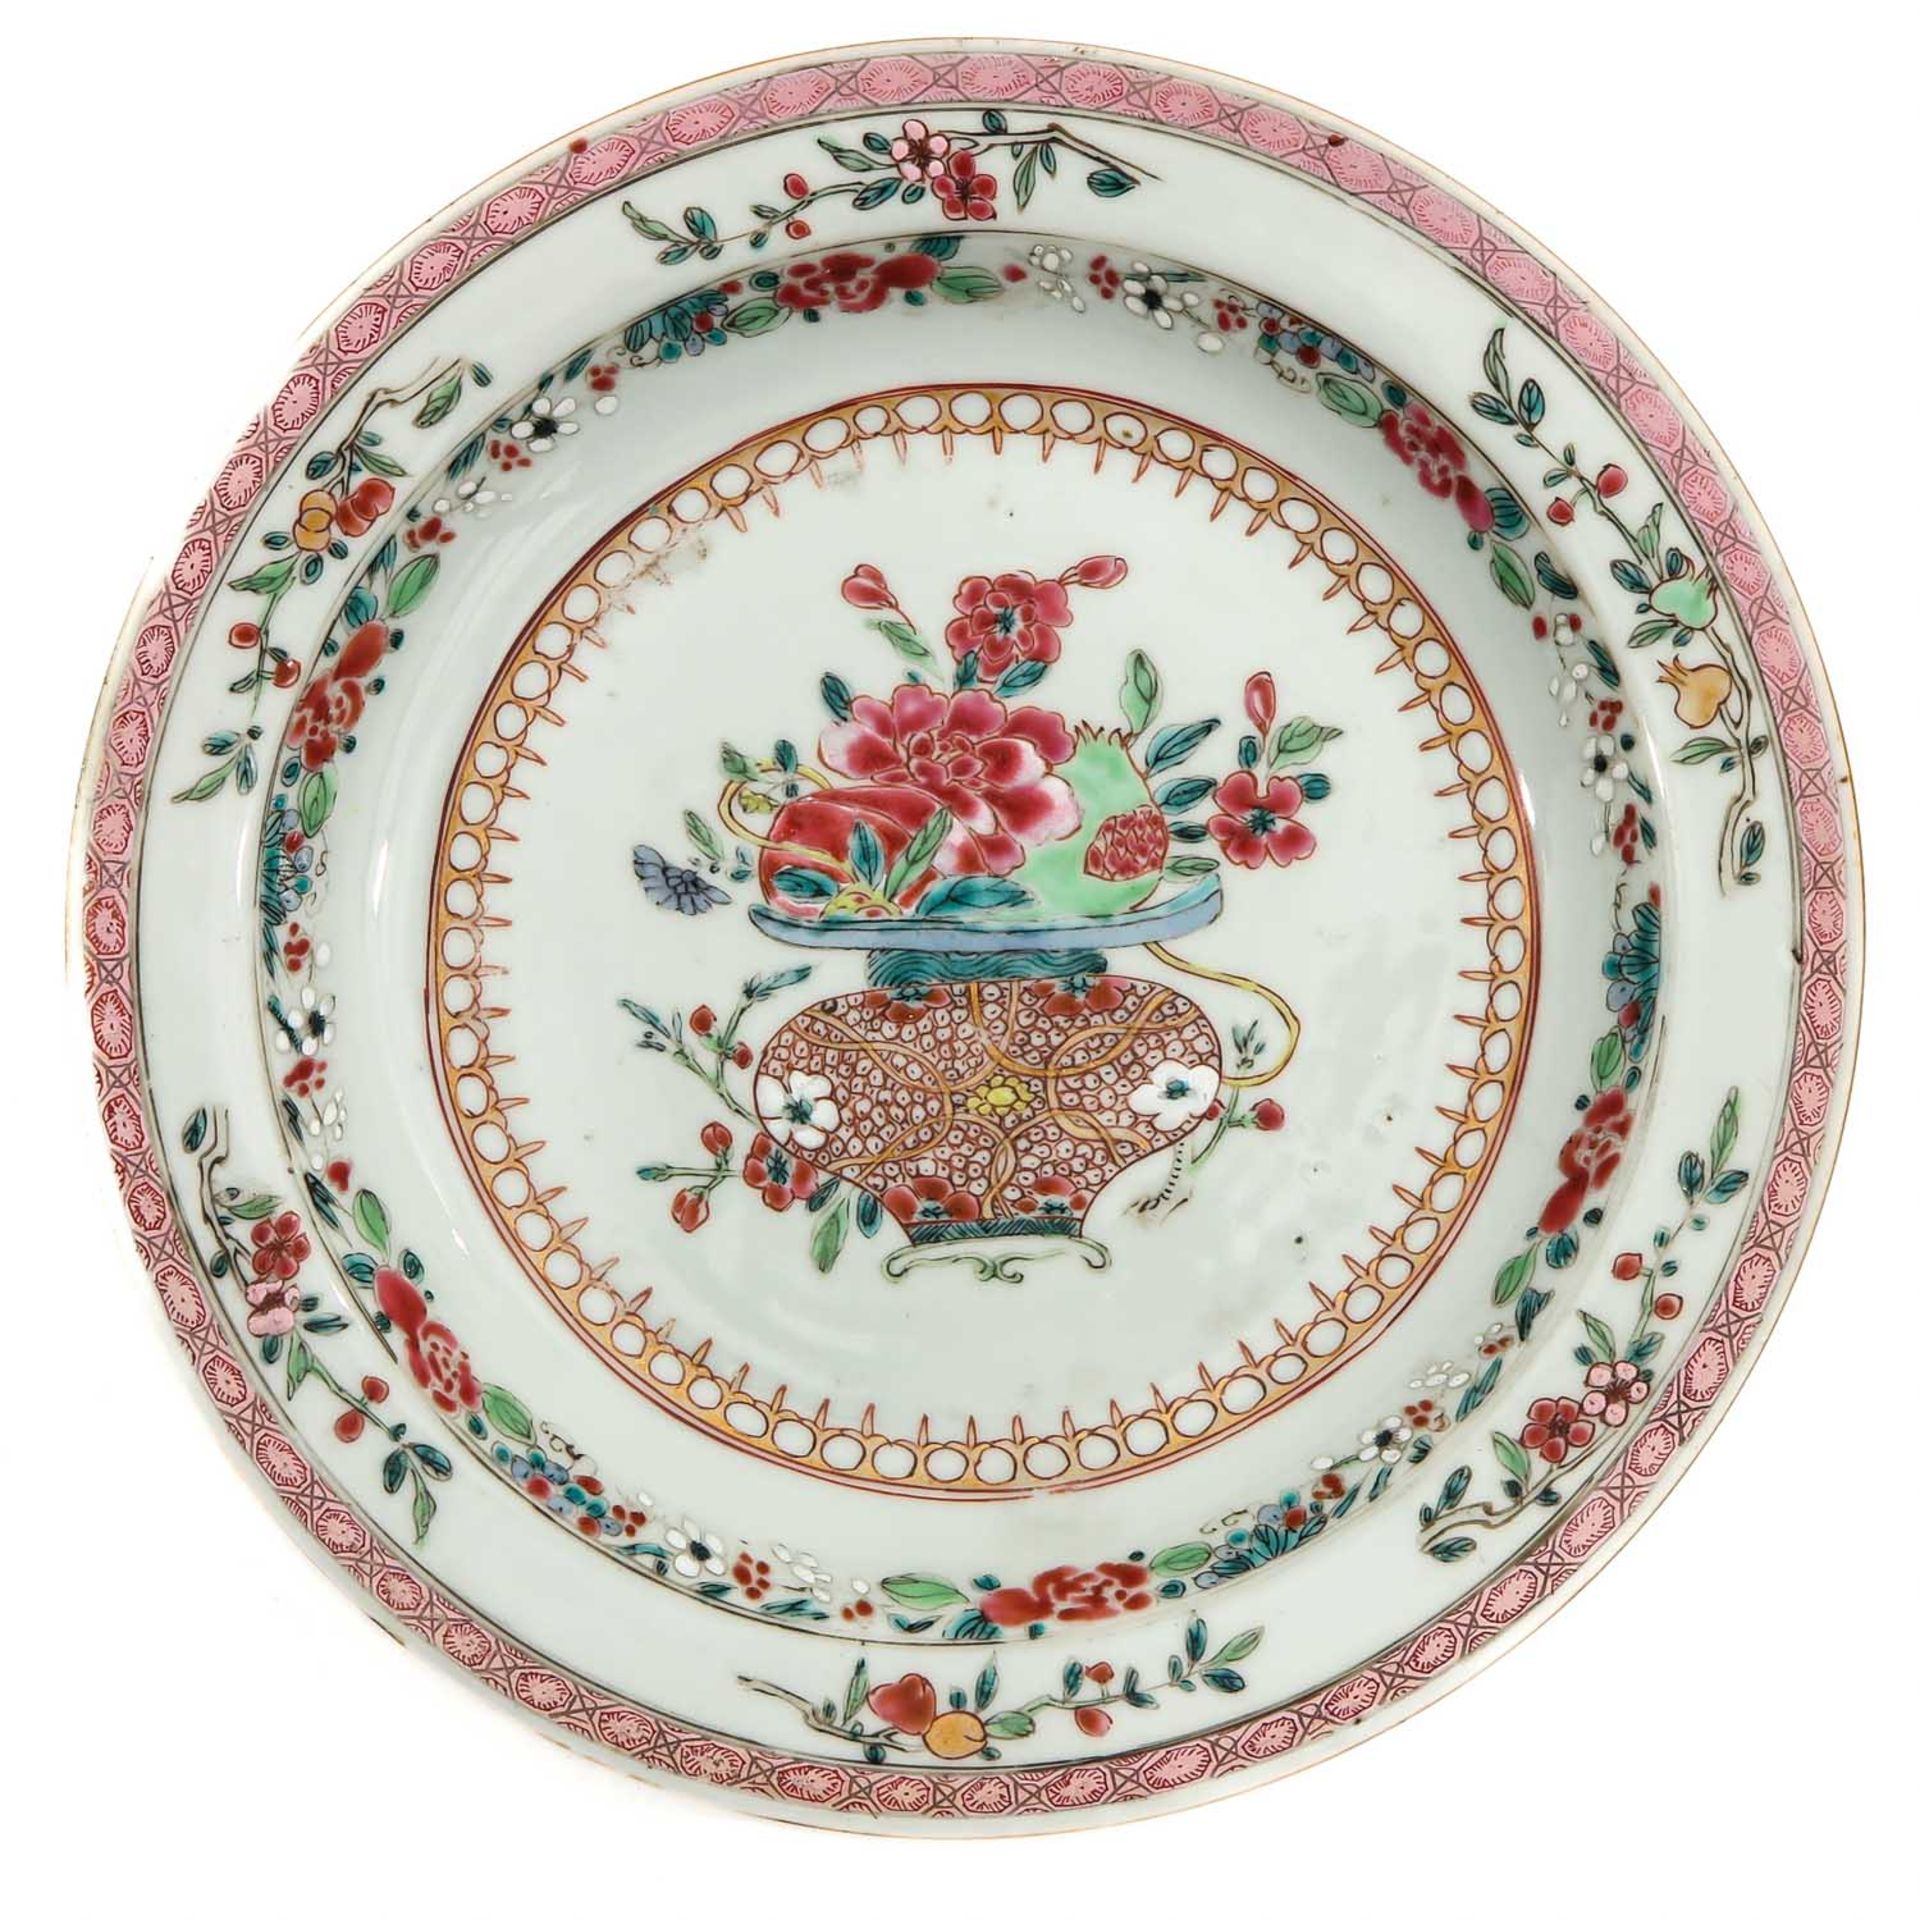 A Series of 3 Famille Rose Plates - Image 3 of 10